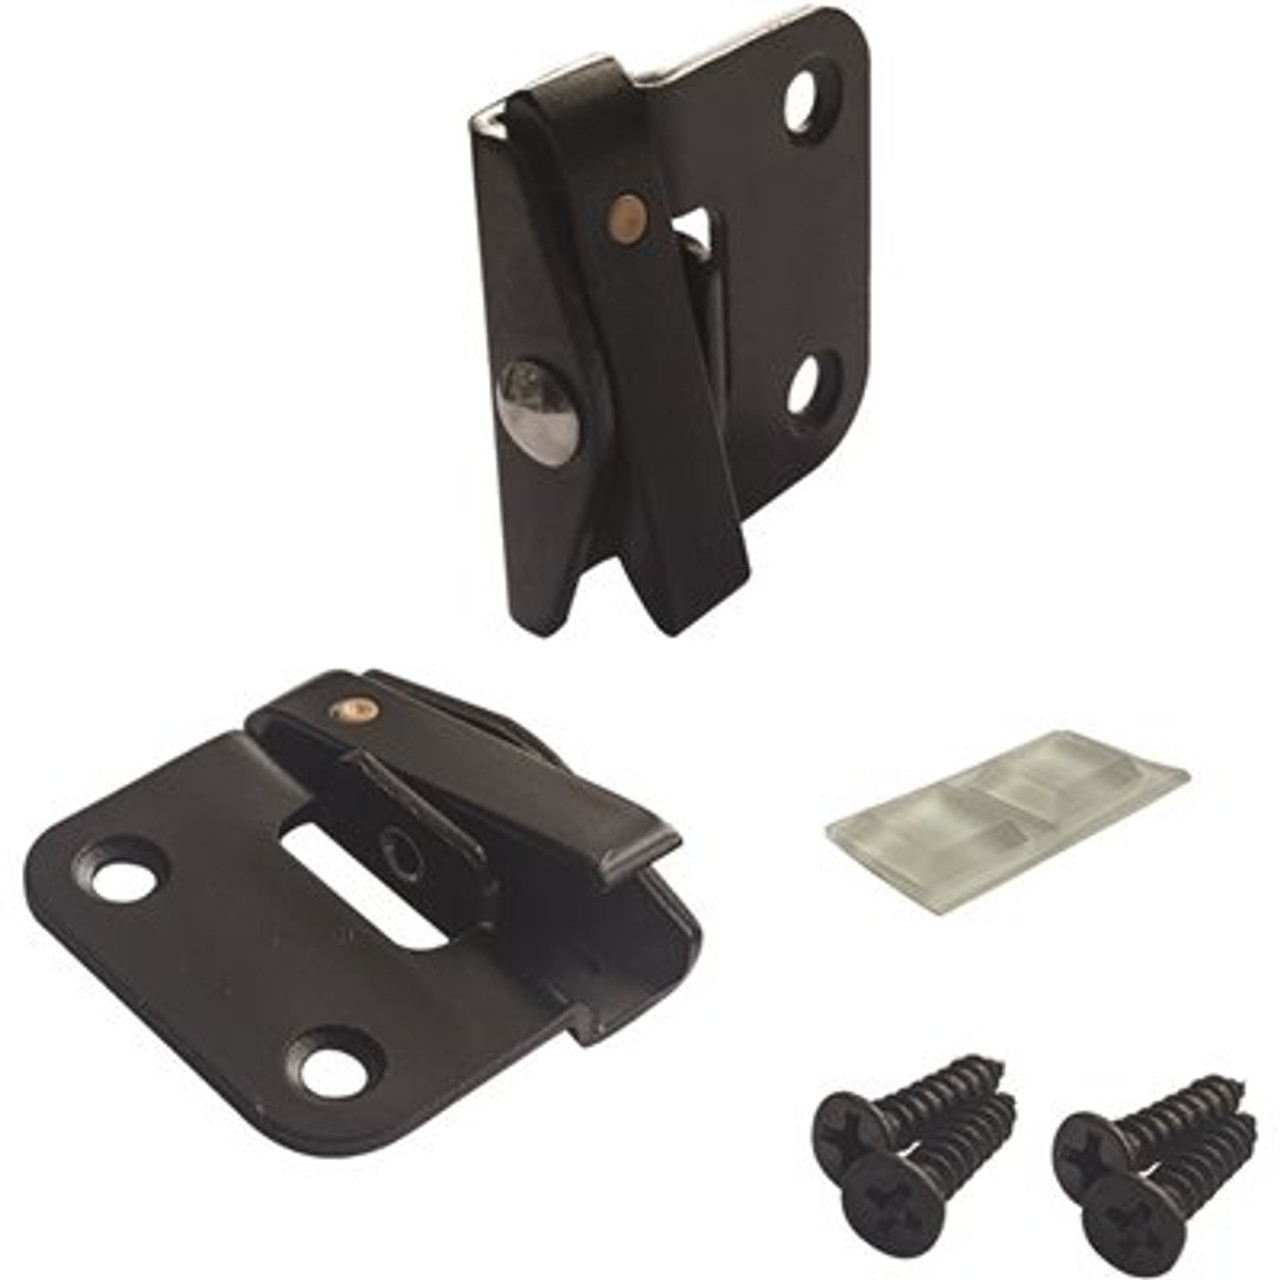 Oil Rubbed Bronze Single Action Single/Double Hung (WOCD) Window Opening Control Device Ventlock (Pack Of 2) - 320654073